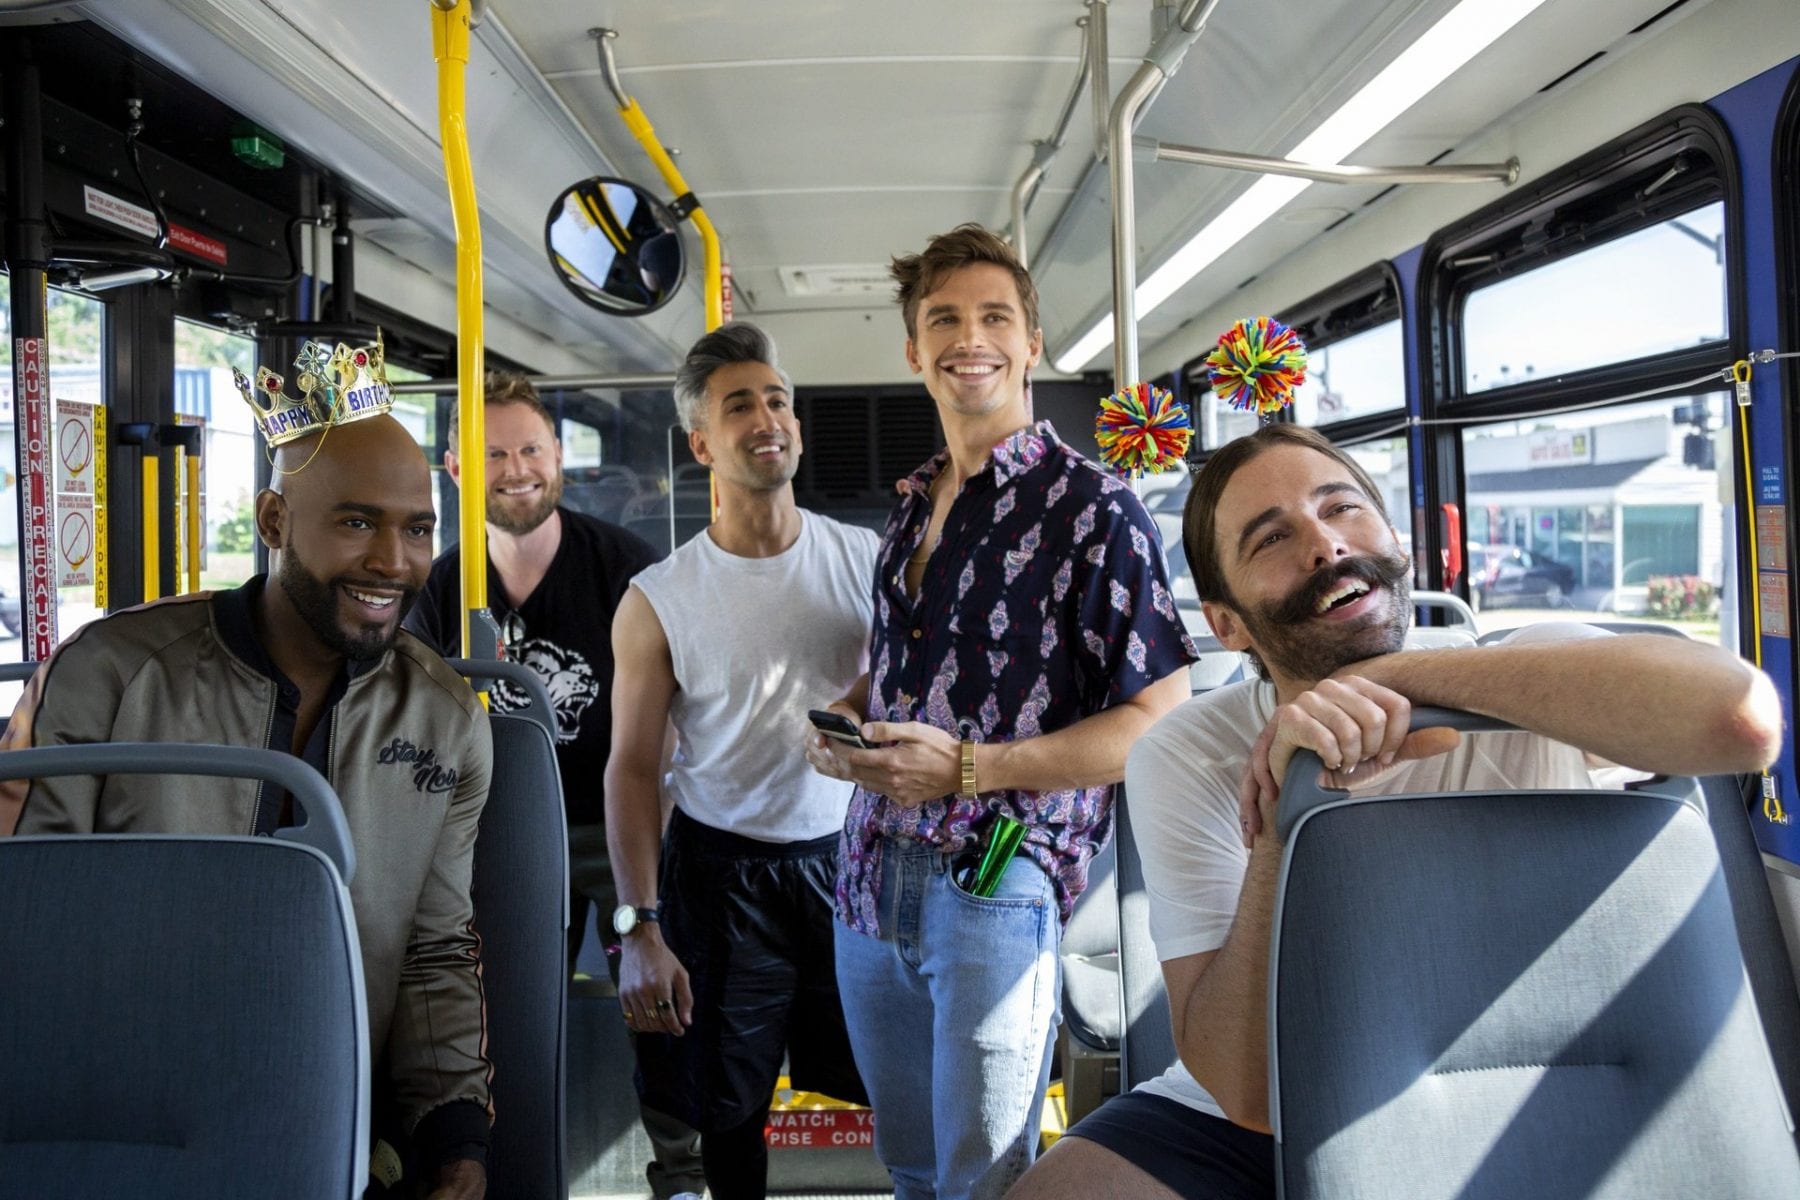 Karamo, Bobby, Tan, Antoni, and JVN on a bus in an episode of Queer Eye